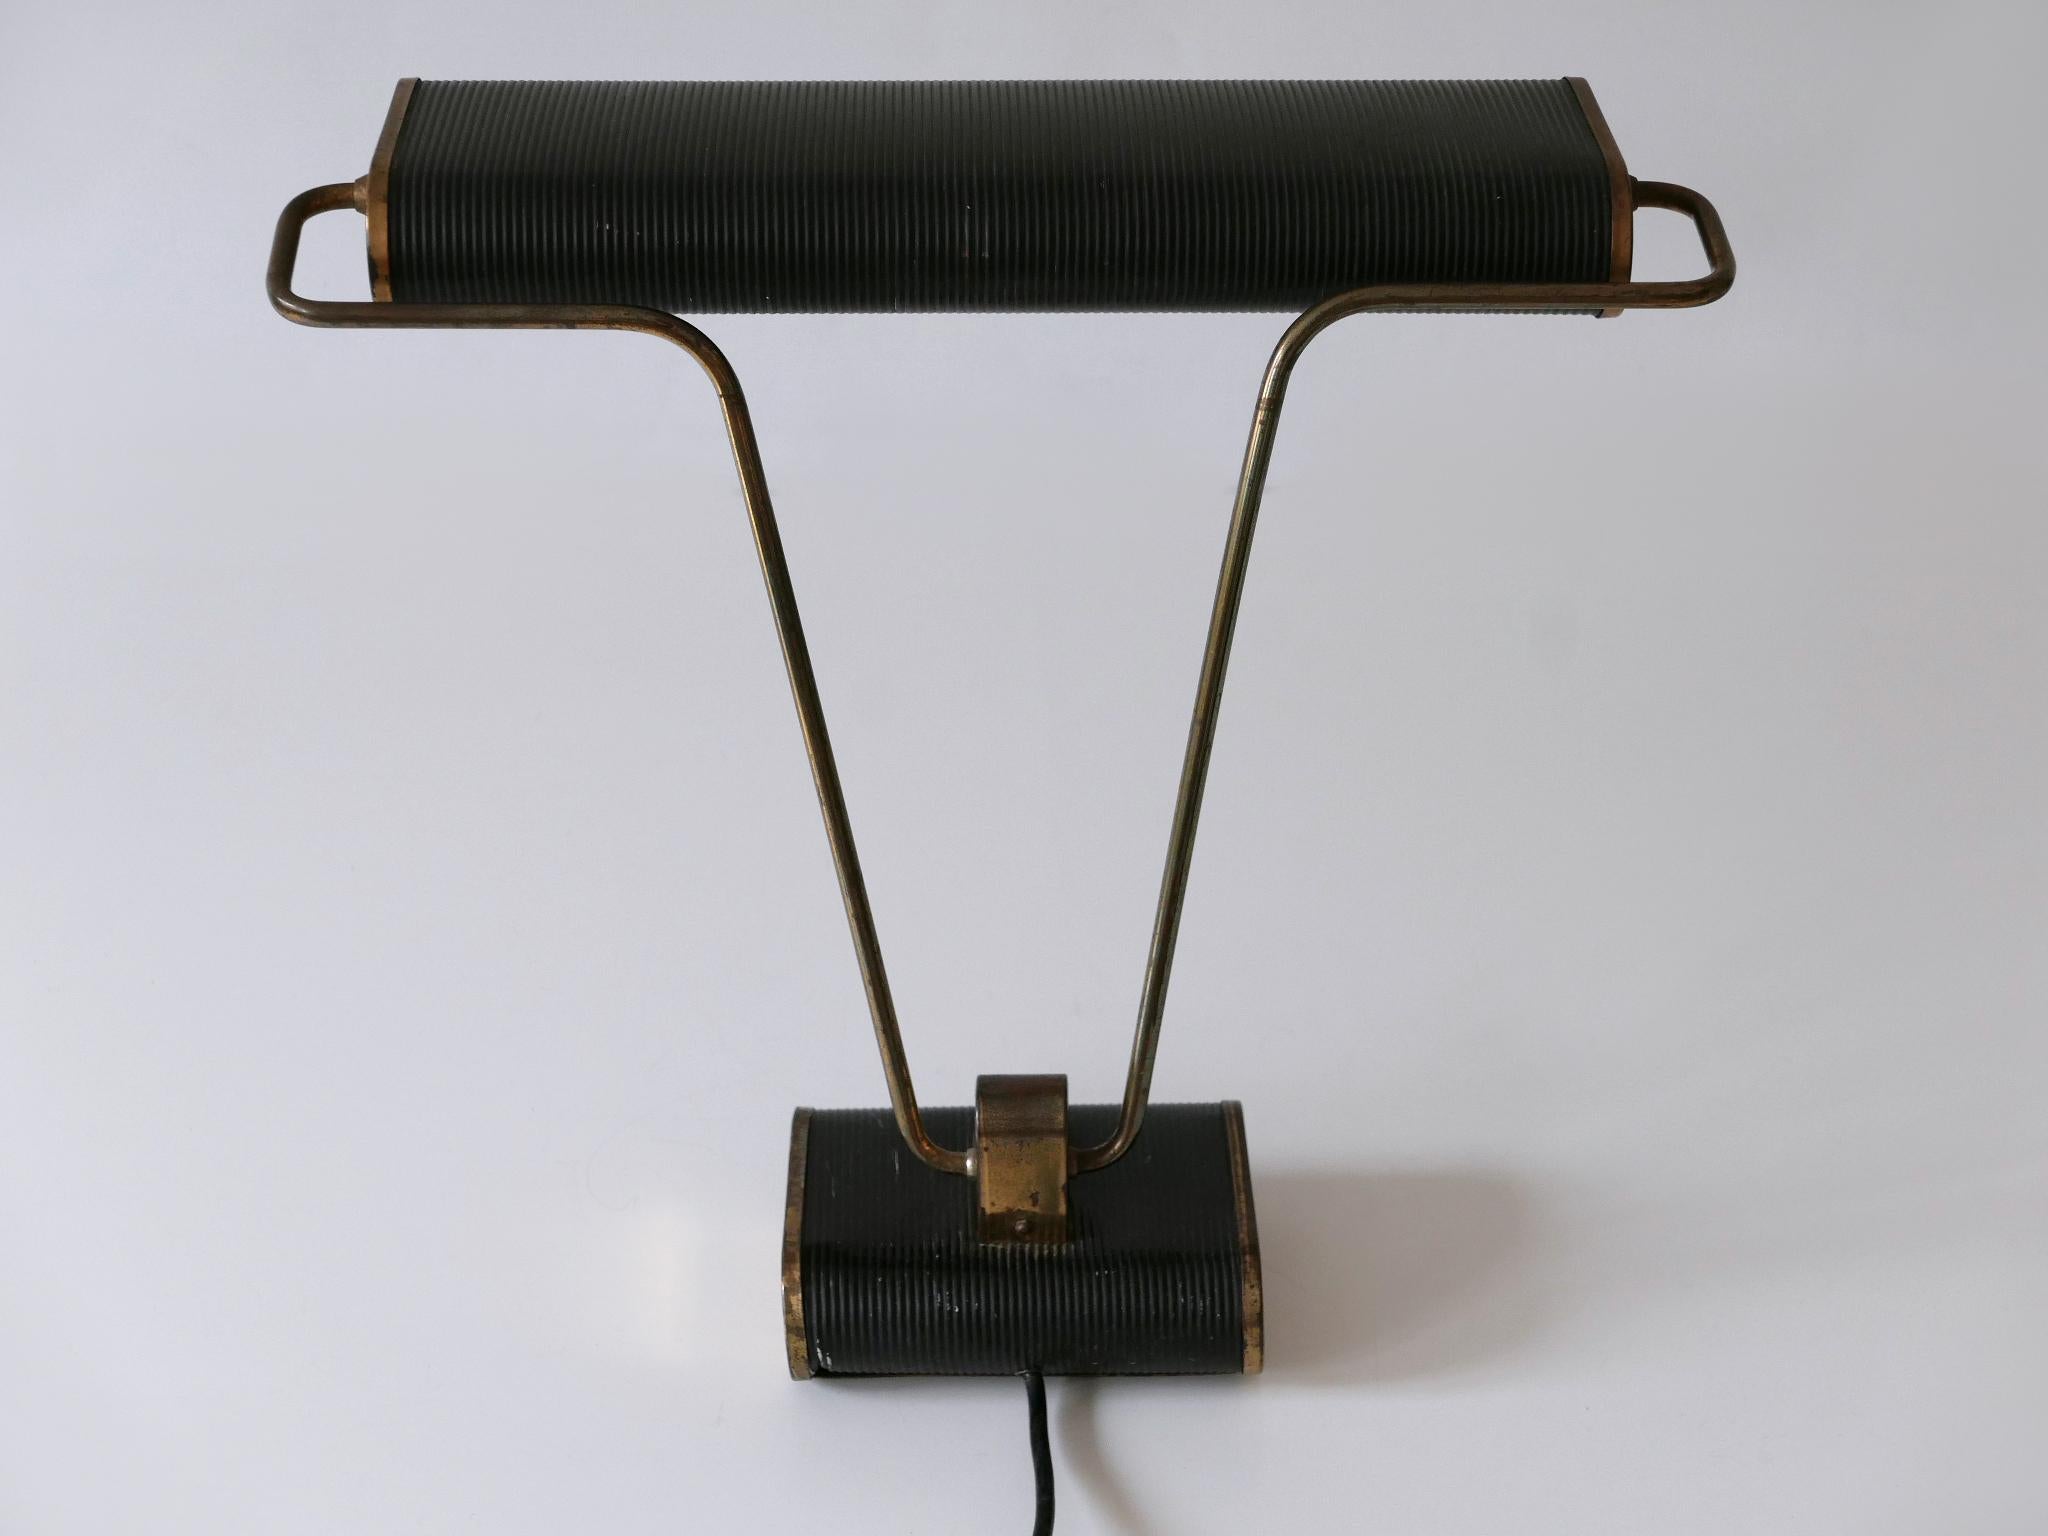 Art Deco Table Lamp or Desk Light 'No 71' by André Mounique for Jumo 1930s For Sale 9